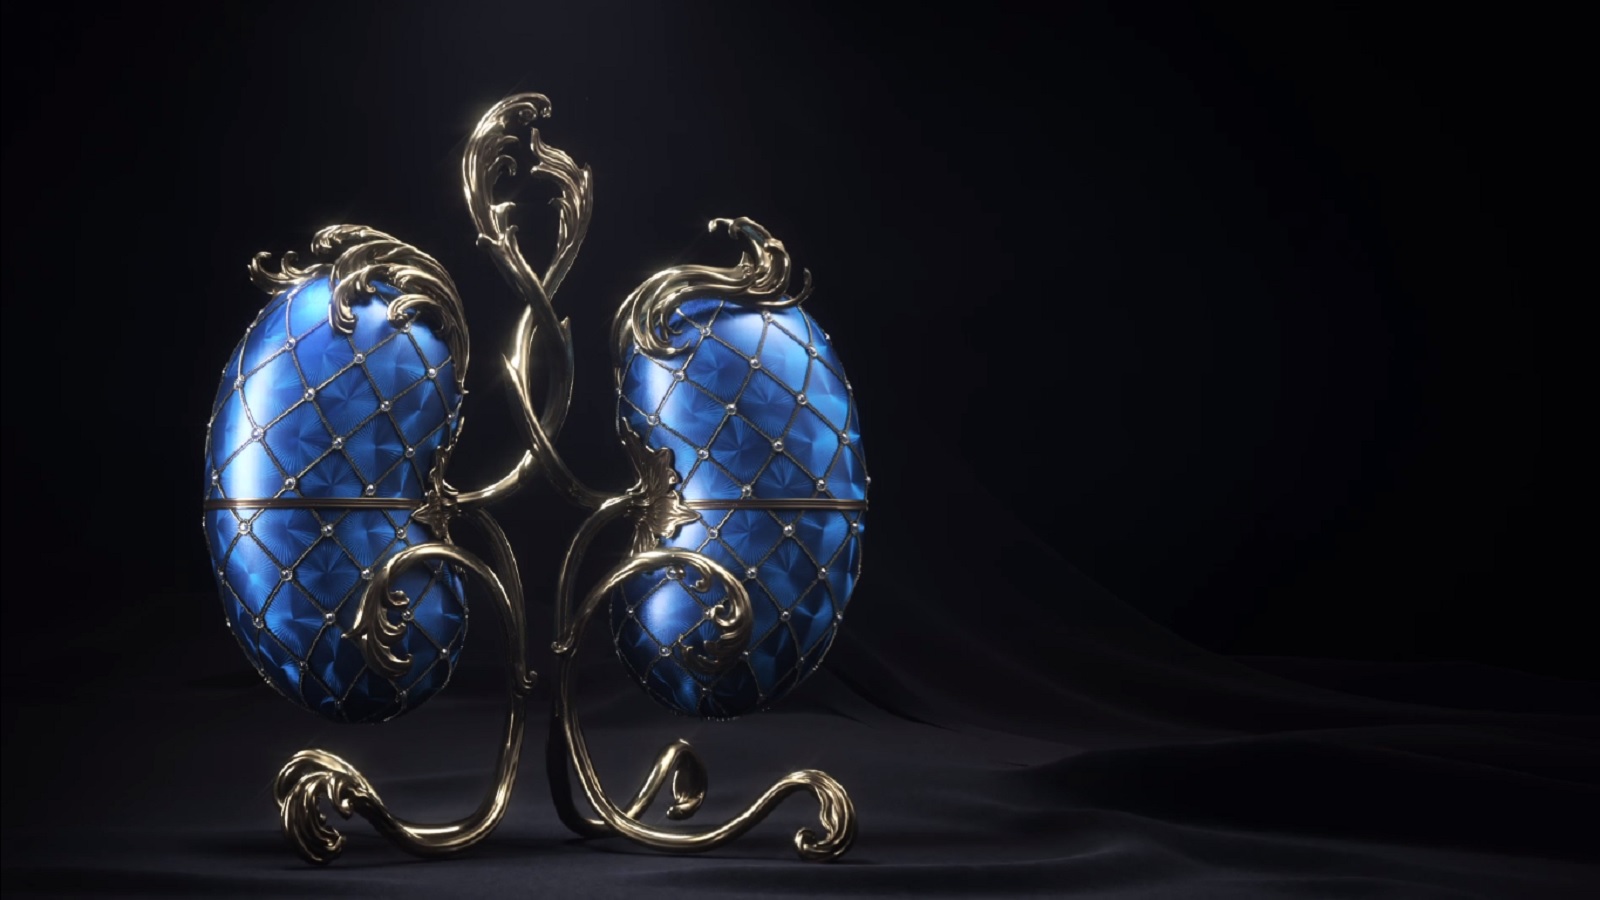 Jeweled Organs Highlight the Importance of Organ Donations